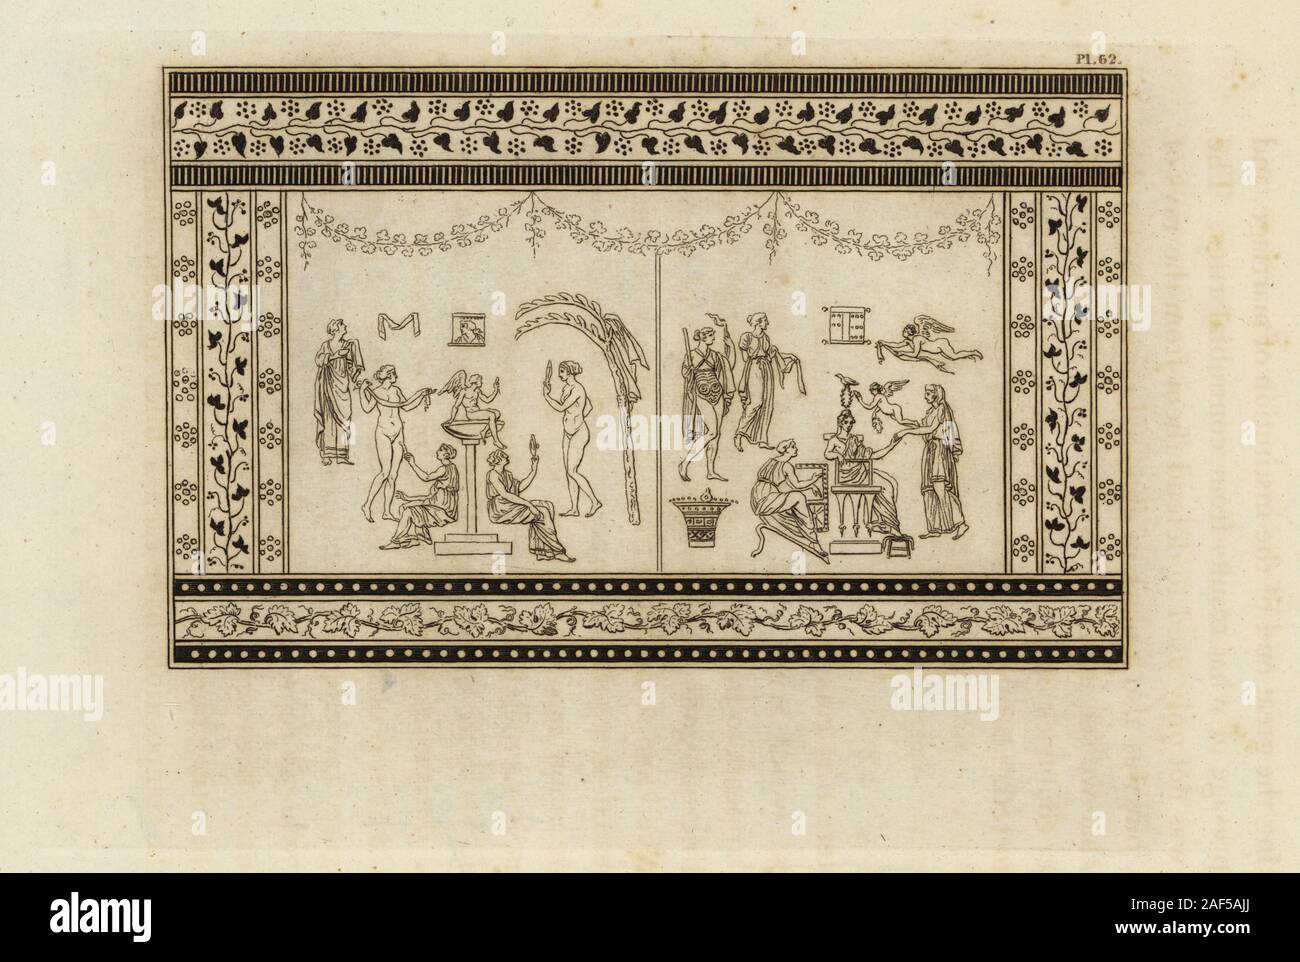 Ancient Roman ceremonies to Venus at Paphos. Venus is seated on a throne wearing a myrtle crown. A figure with torch represents Adonis. Priestesses offer fillets or ribbons to the tabernaculum holding the cistus. Copperplate engraving by Thomas Kirk (1765-1797)  from Sir William Hamilton’s Outlines from the Figures and Compositions upon the Greek, Roman and Etruscan Vases of the Late Sir Hamilton, T. M’Lean, London, 1834. Stock Photo